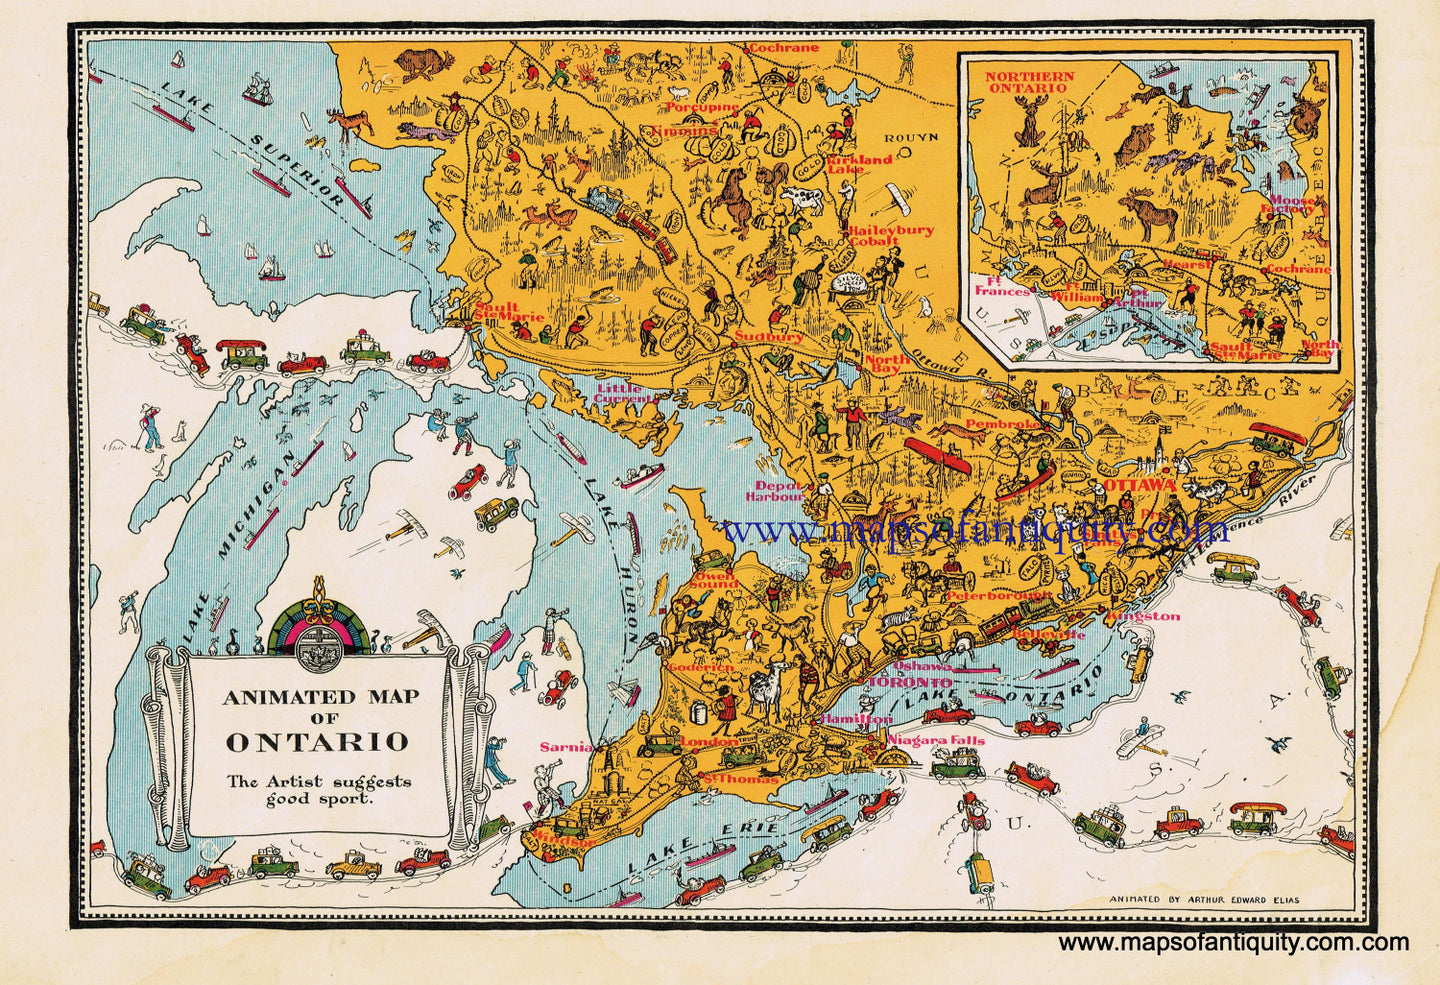 Antique-Printed-Color-Pictorial-Map-Animated-Map-of-Ontario-North-America-Canada-1940s-Arthur-Edward-Elias-Maps-Of-Antiquity